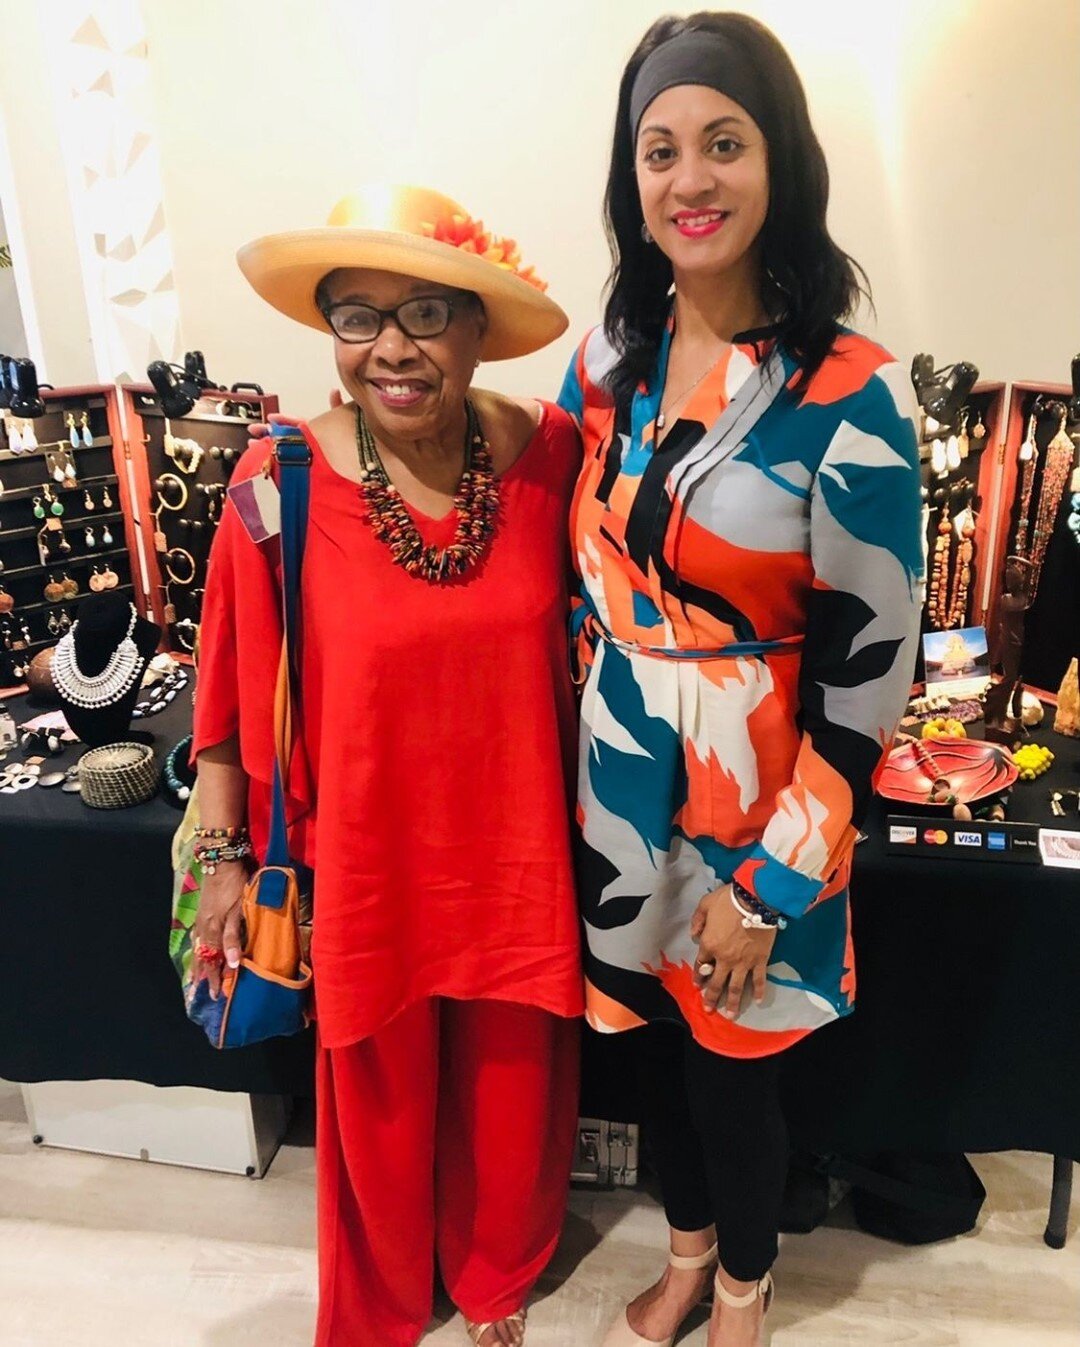 Today we are shouting out a customer who has always supported Janie's Emporium ❤️ Here is a photo of her in one of our pieces at one of our pop up events 
.
.
Shop janiesemporium.com 🛍️